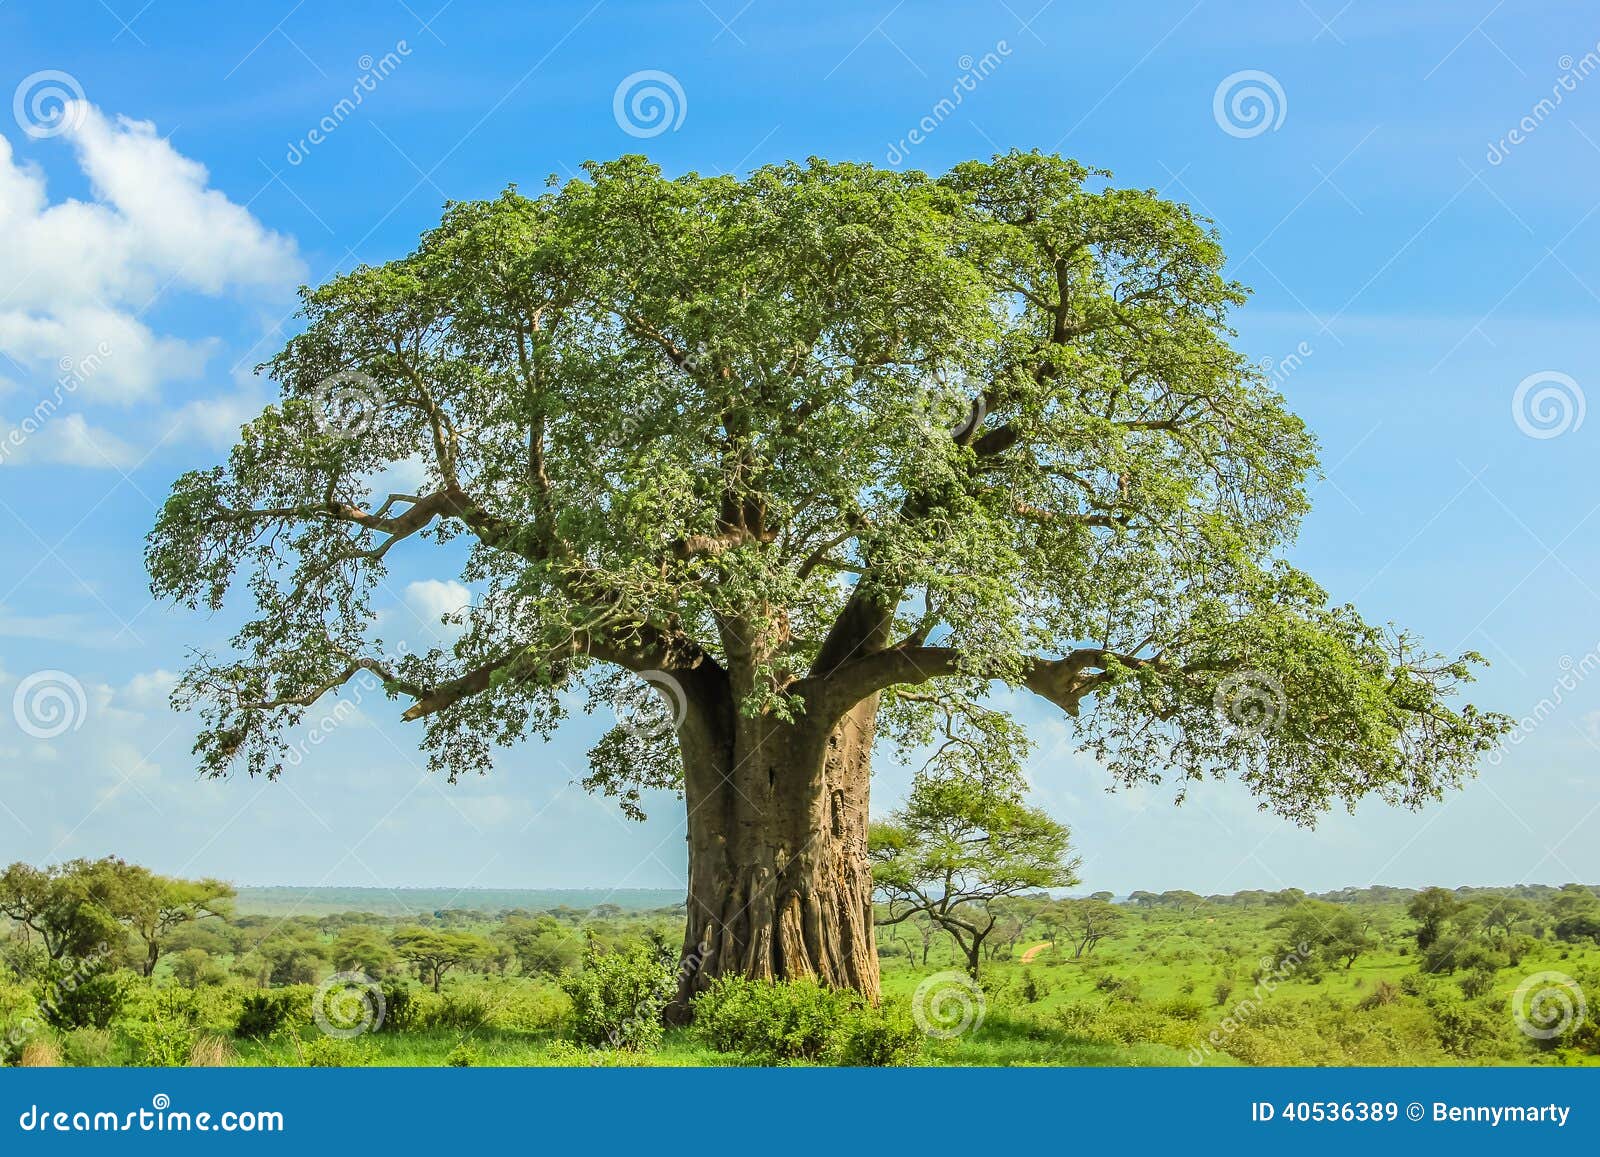 7 3 Baobab Photos Free Royalty Free Stock Photos From Dreamstime